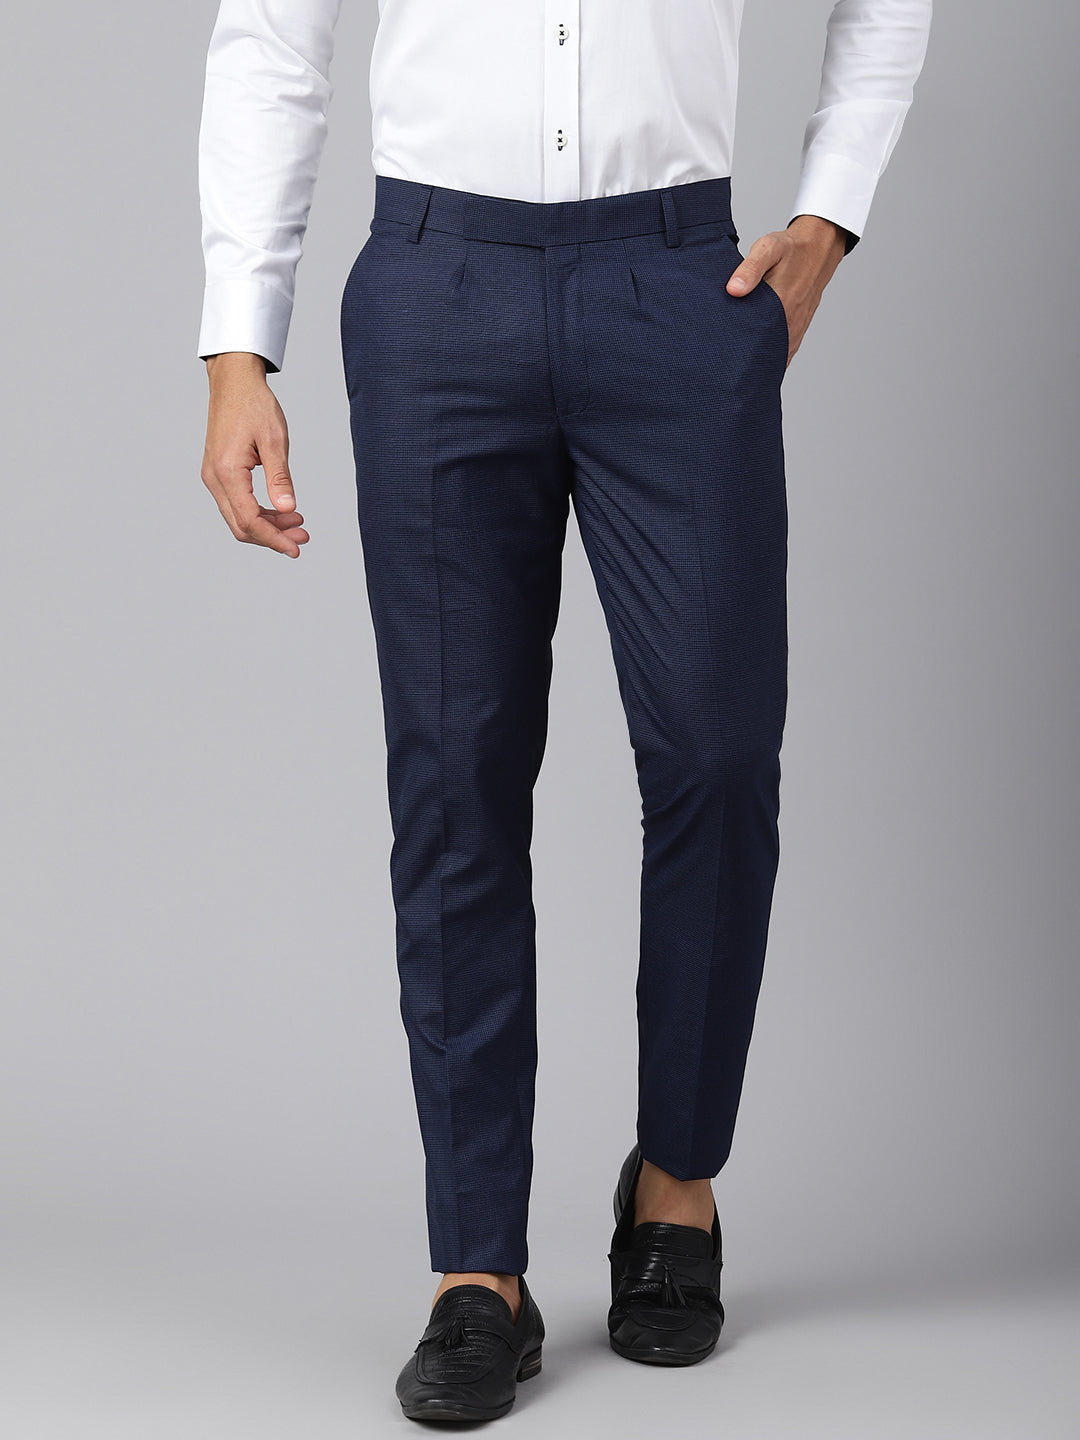 Top Cotton Trouser Manufacturers in Indore  कटन टरउजर मनफकचररस  इदर  Best Cotton Pant Manufacturers  Justdial